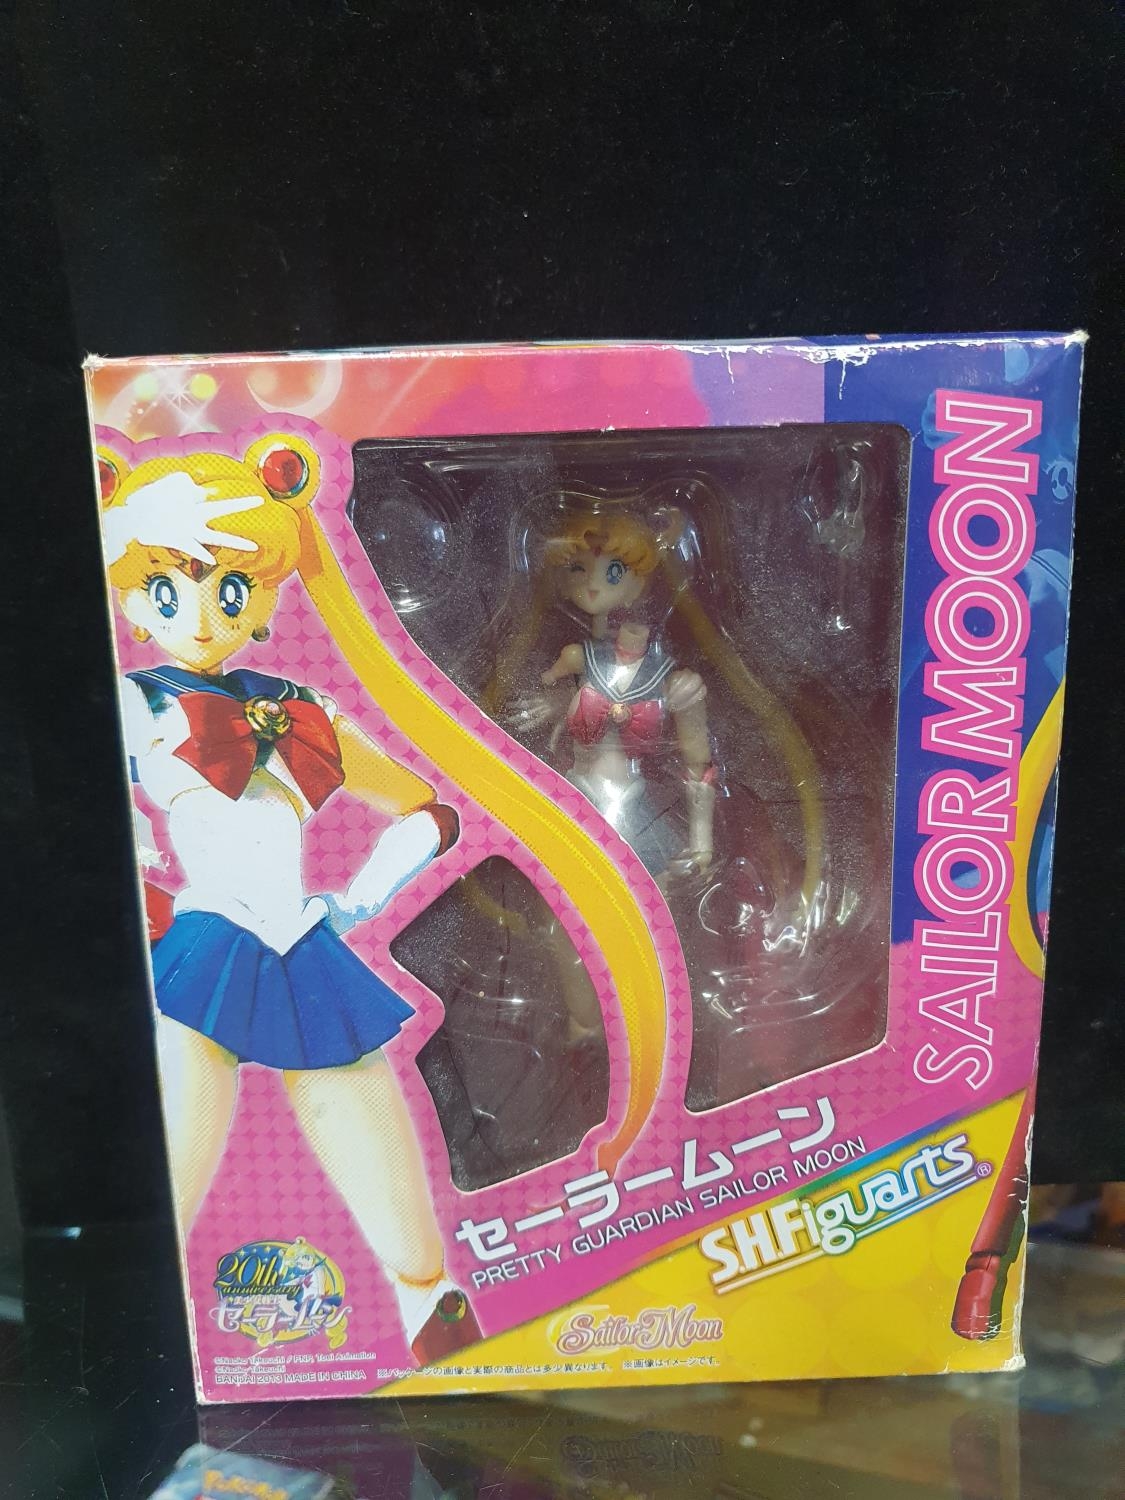 A boxed S.H.figuarts Sailor Moon figure. (unchecked)